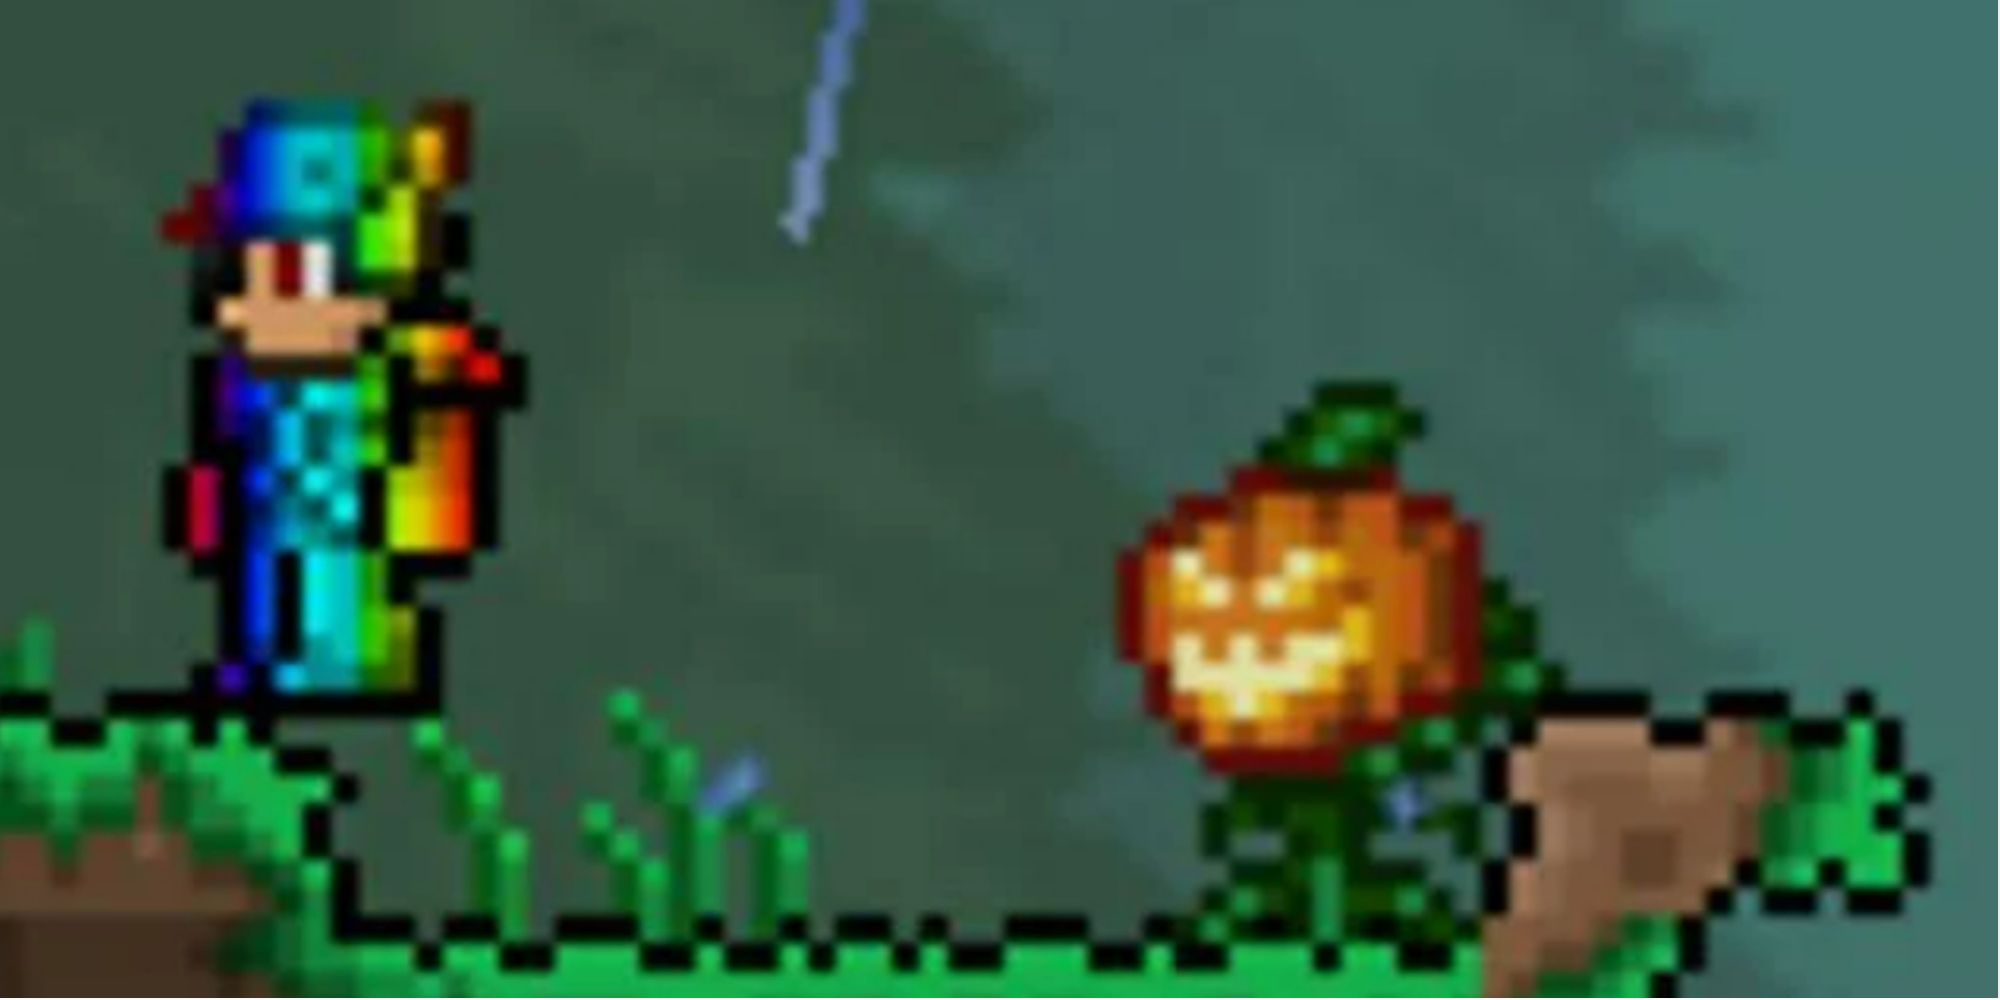 squashling pet and character in terraria